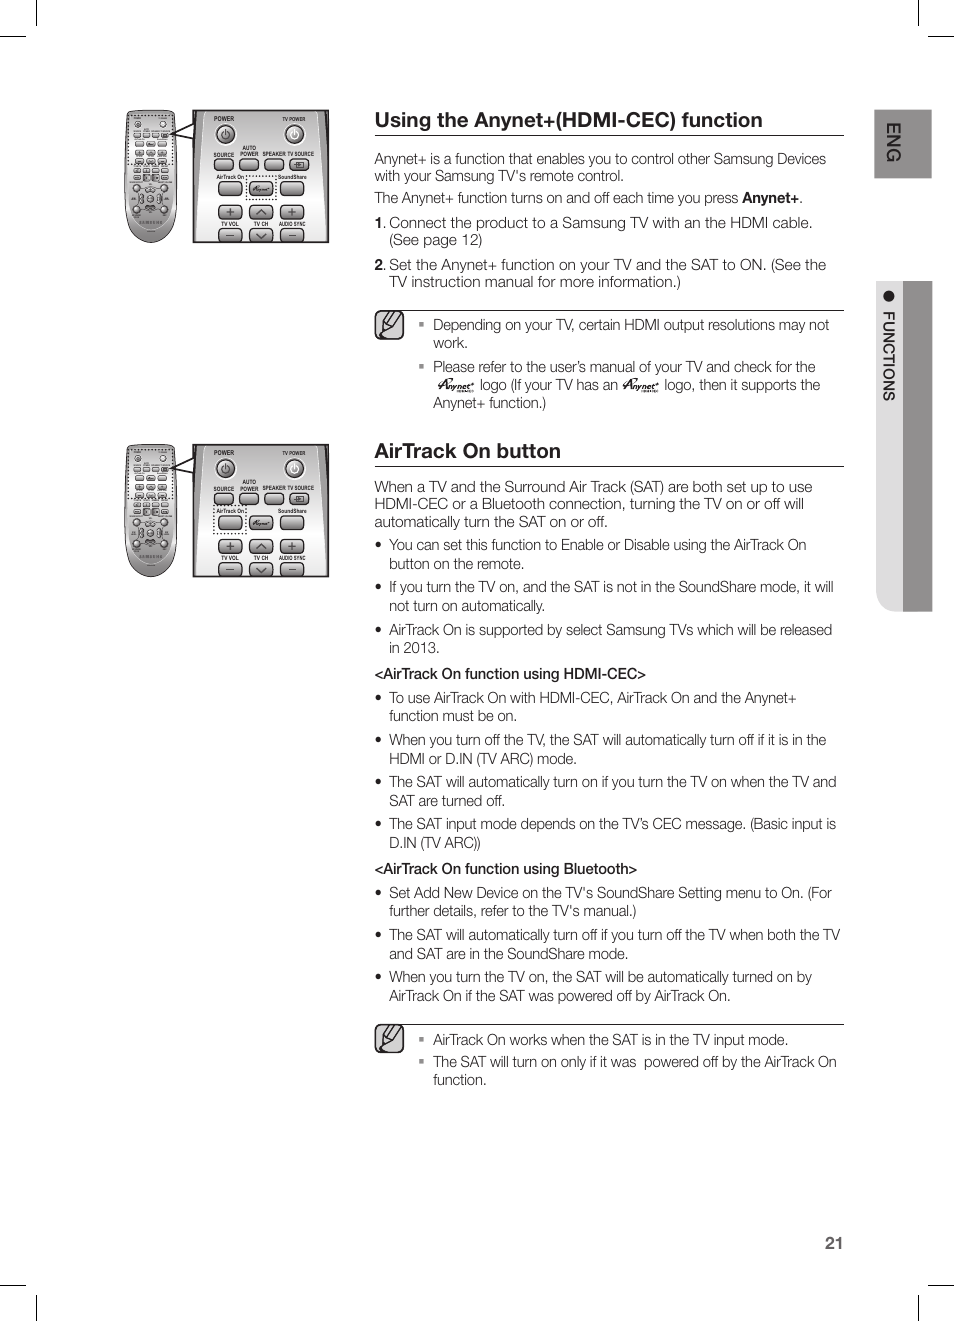 Using the anynet+(hdmi-cec) function, Airtrack on button, Functions |  Samsung HW-FM45C-ZA User Manual | Page 21 / 26 | Original mode